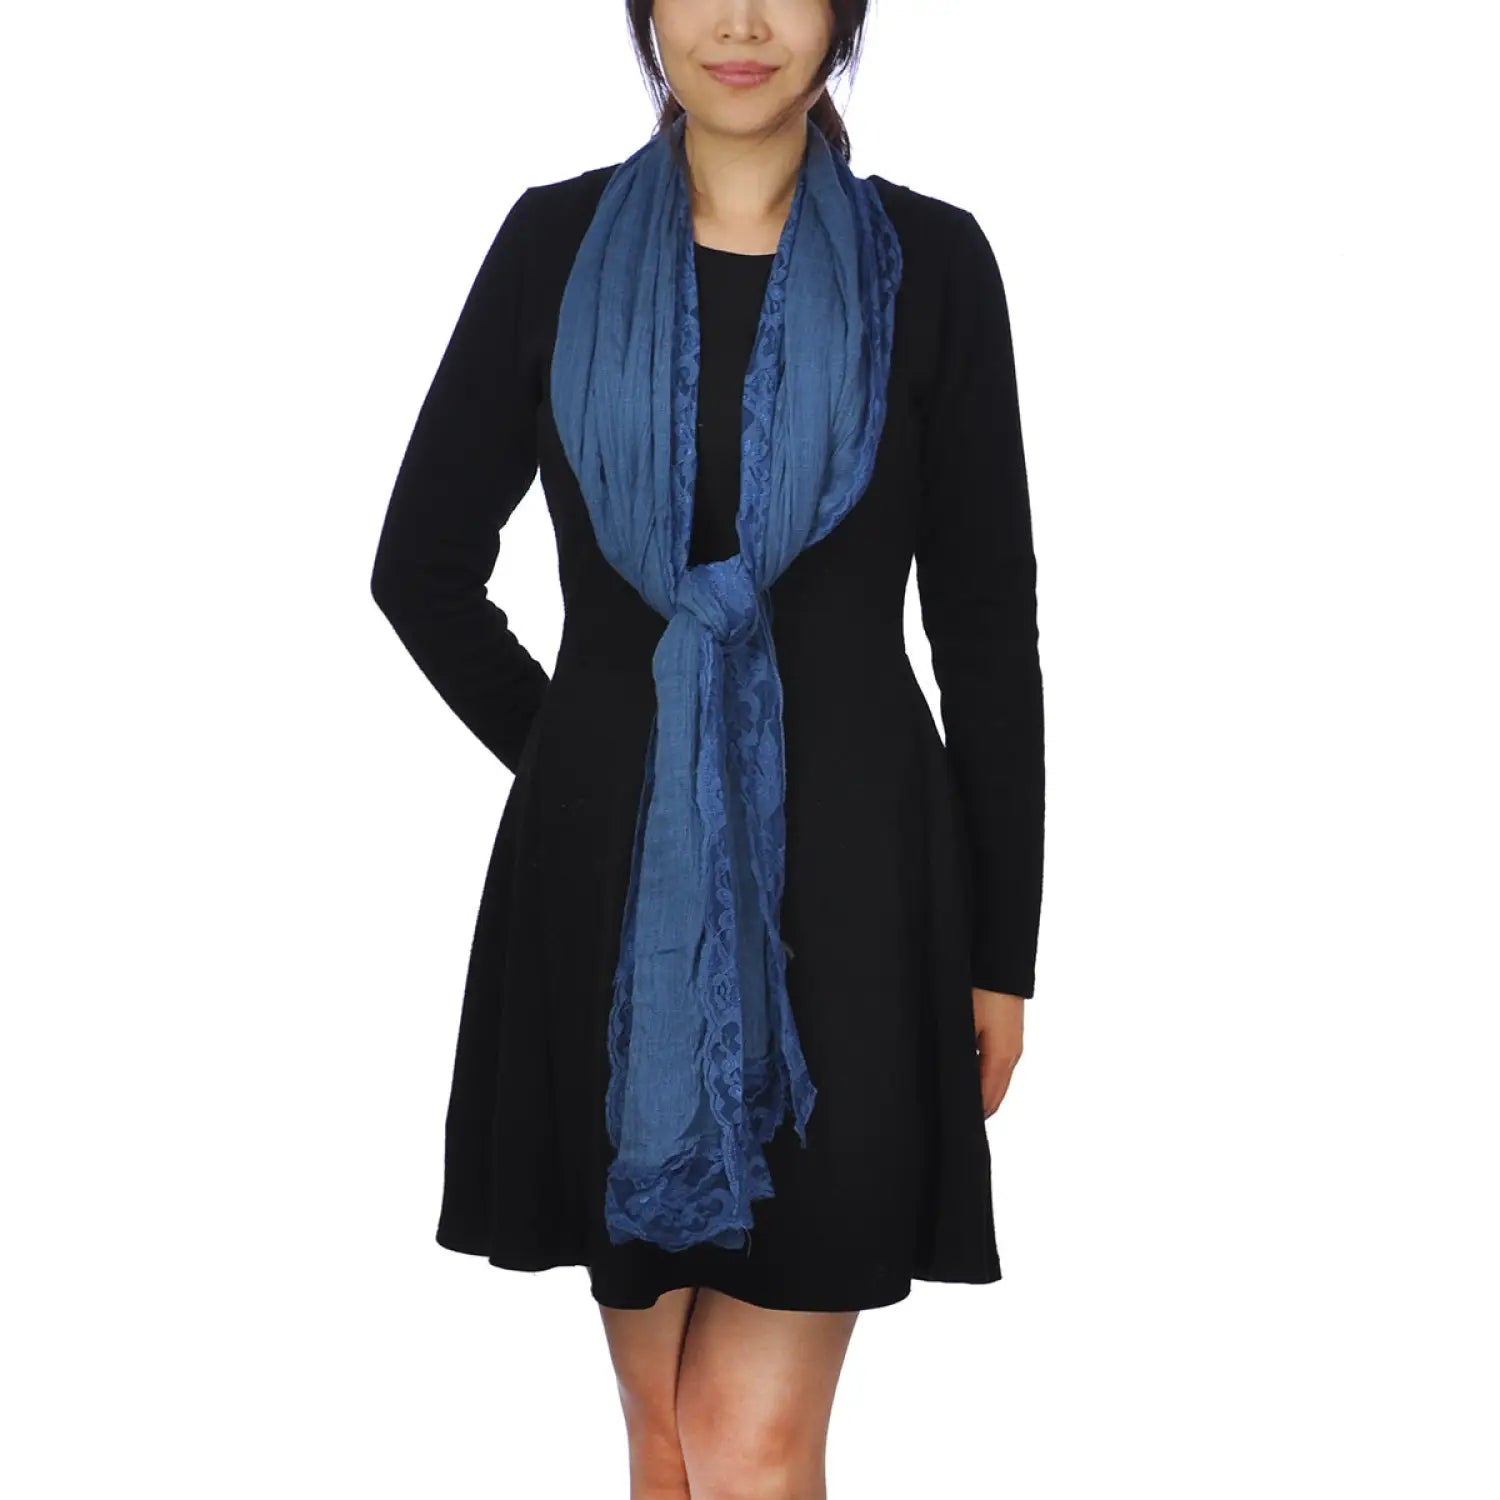 Woman wearing blue cotton crinkled lace-edged evening scarf.